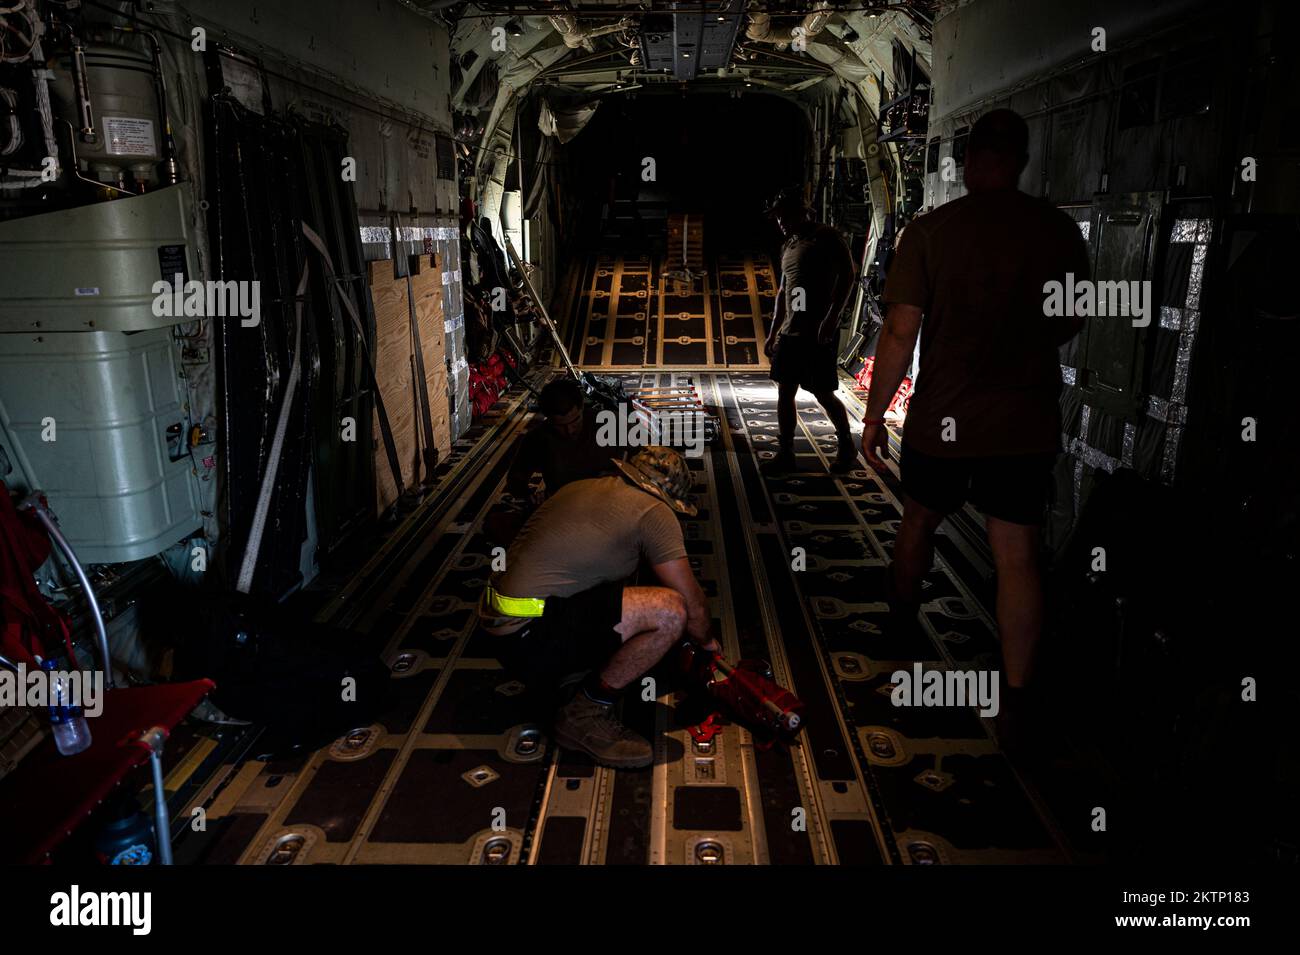 U.S. Air Force HC-130J Combat King II crew chiefs assigned to the 81st Expeditionary Rescue Squadron (ERQS) break down seats in a HC-130J, on Camp Lemonnier, Djibouti, Oct. 16, 2022. The 81st ERQS is a rapidly deployable combat search and rescue force that can conduct tactical air refueling, airdrop and airland of personnel and/or equipment during day or night operations in support of combat personnel recovery within Combined Joint Task Force – Horn of Africa area of responsibility. (U.S. Air Force photo by Staff Sgt. Devin M. Rumbaugh) Stock Photo